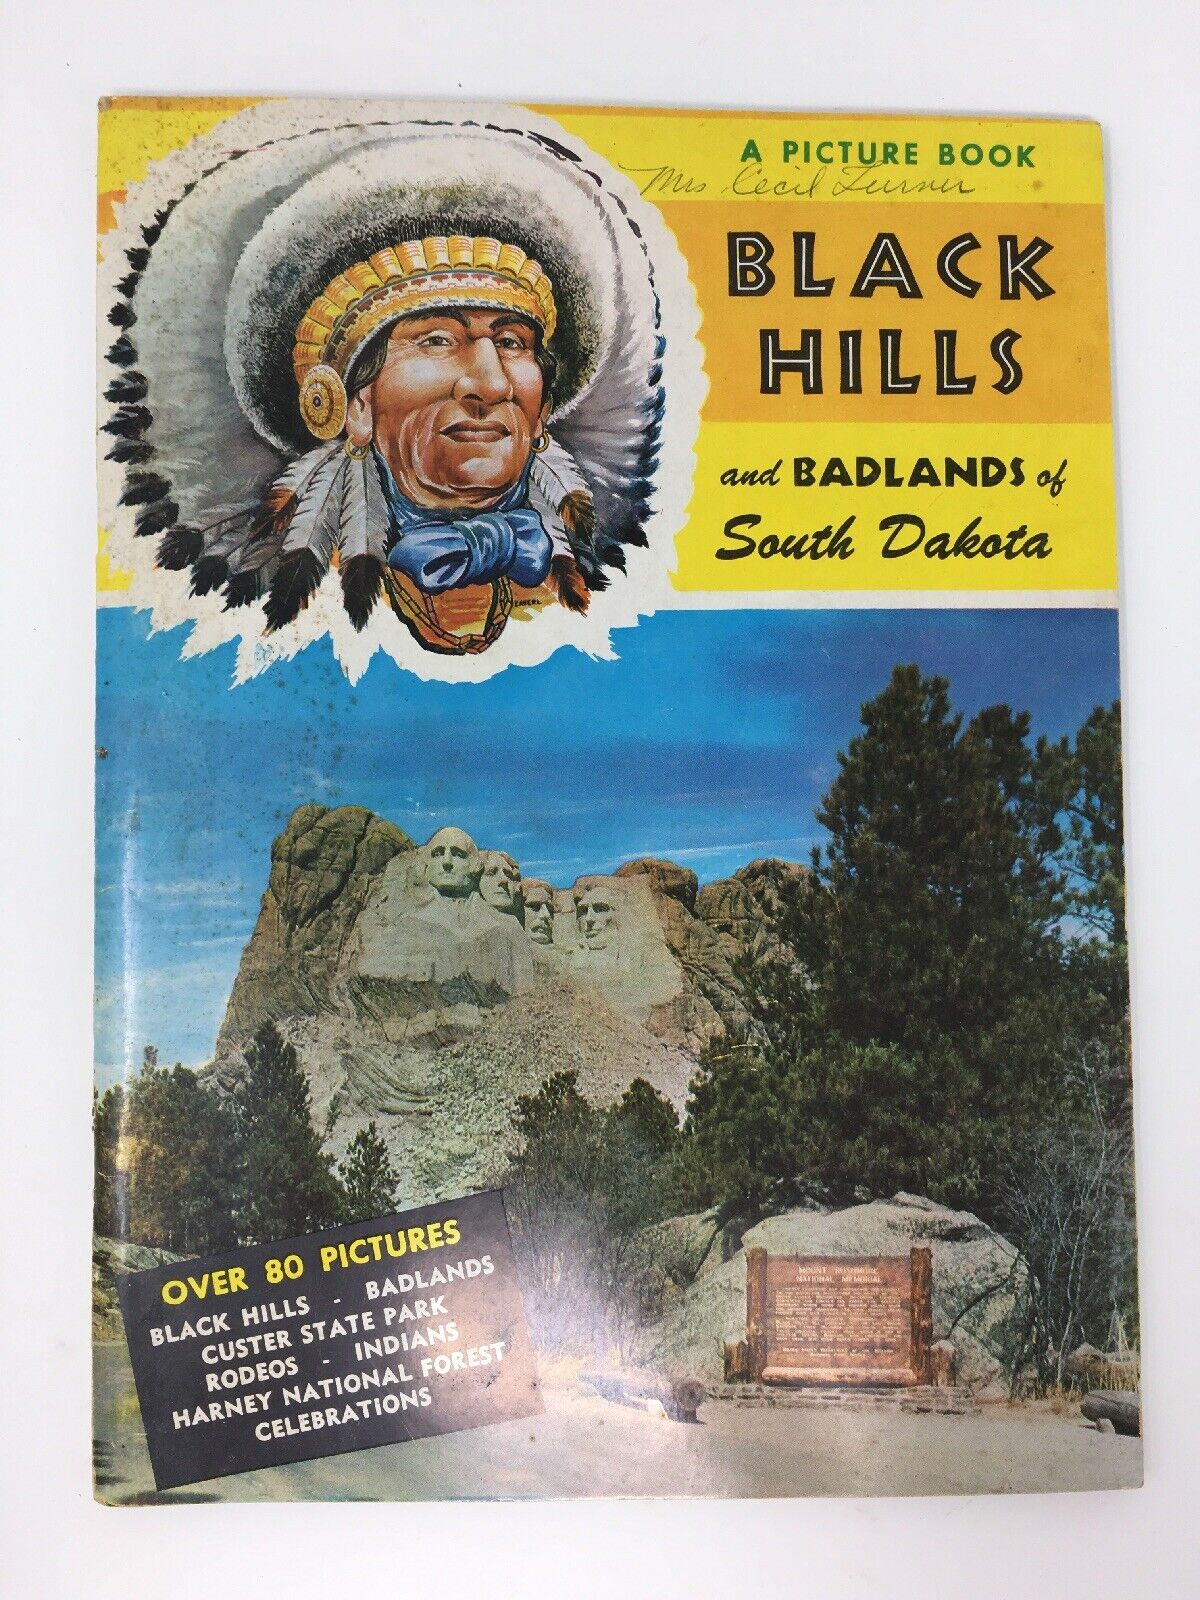 1955 A Picture Book Black Hills and Badlands of South Dakota Book Booklet